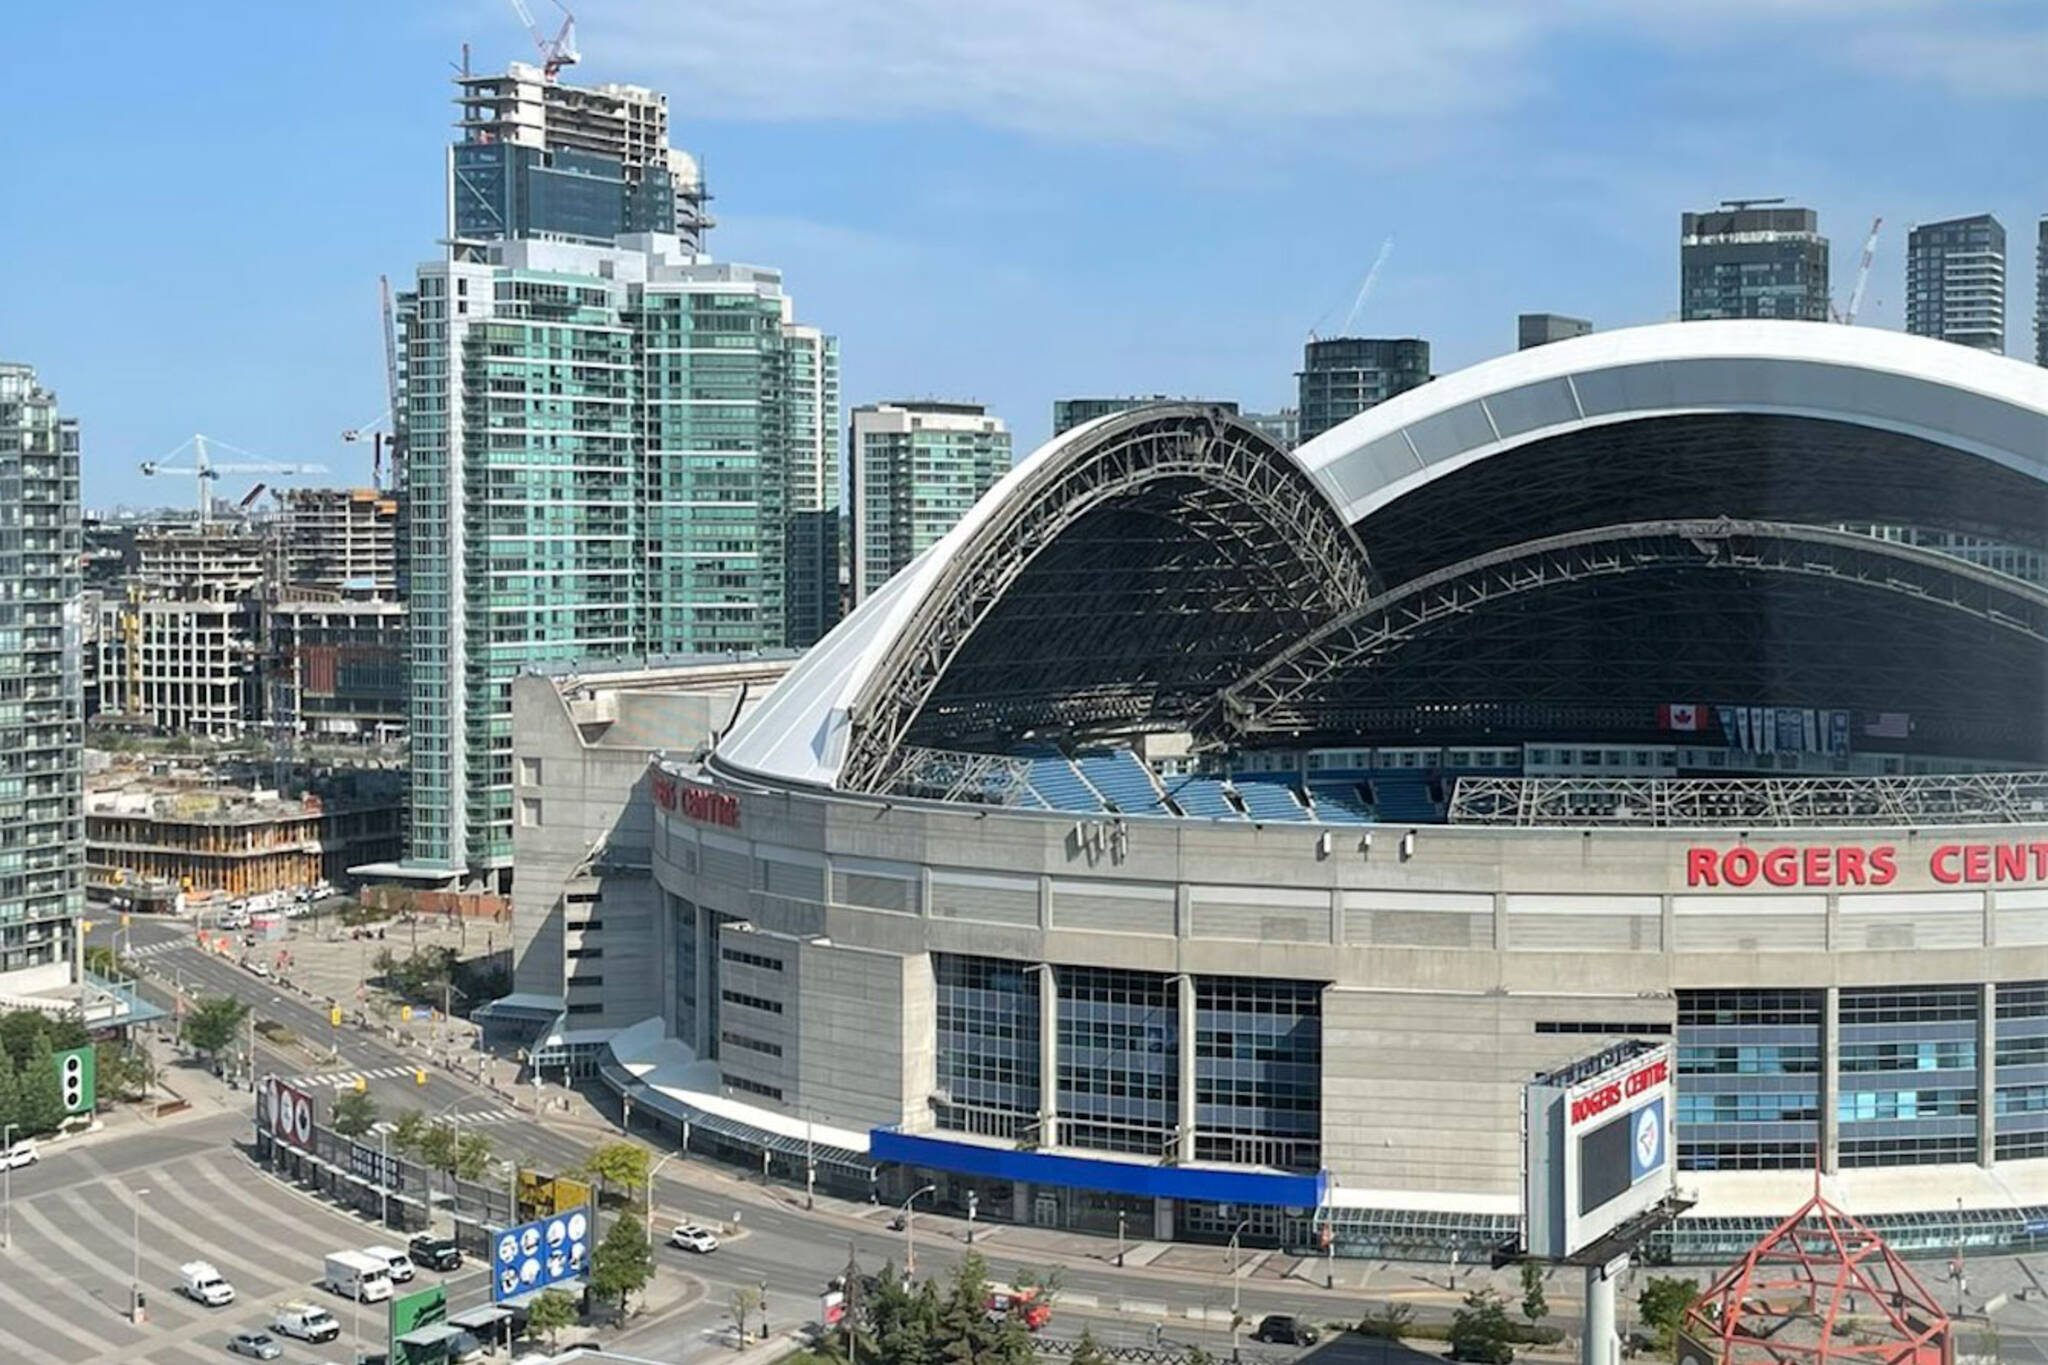 Blue Jays to open Rogers Centre roof on earliest date ever vs